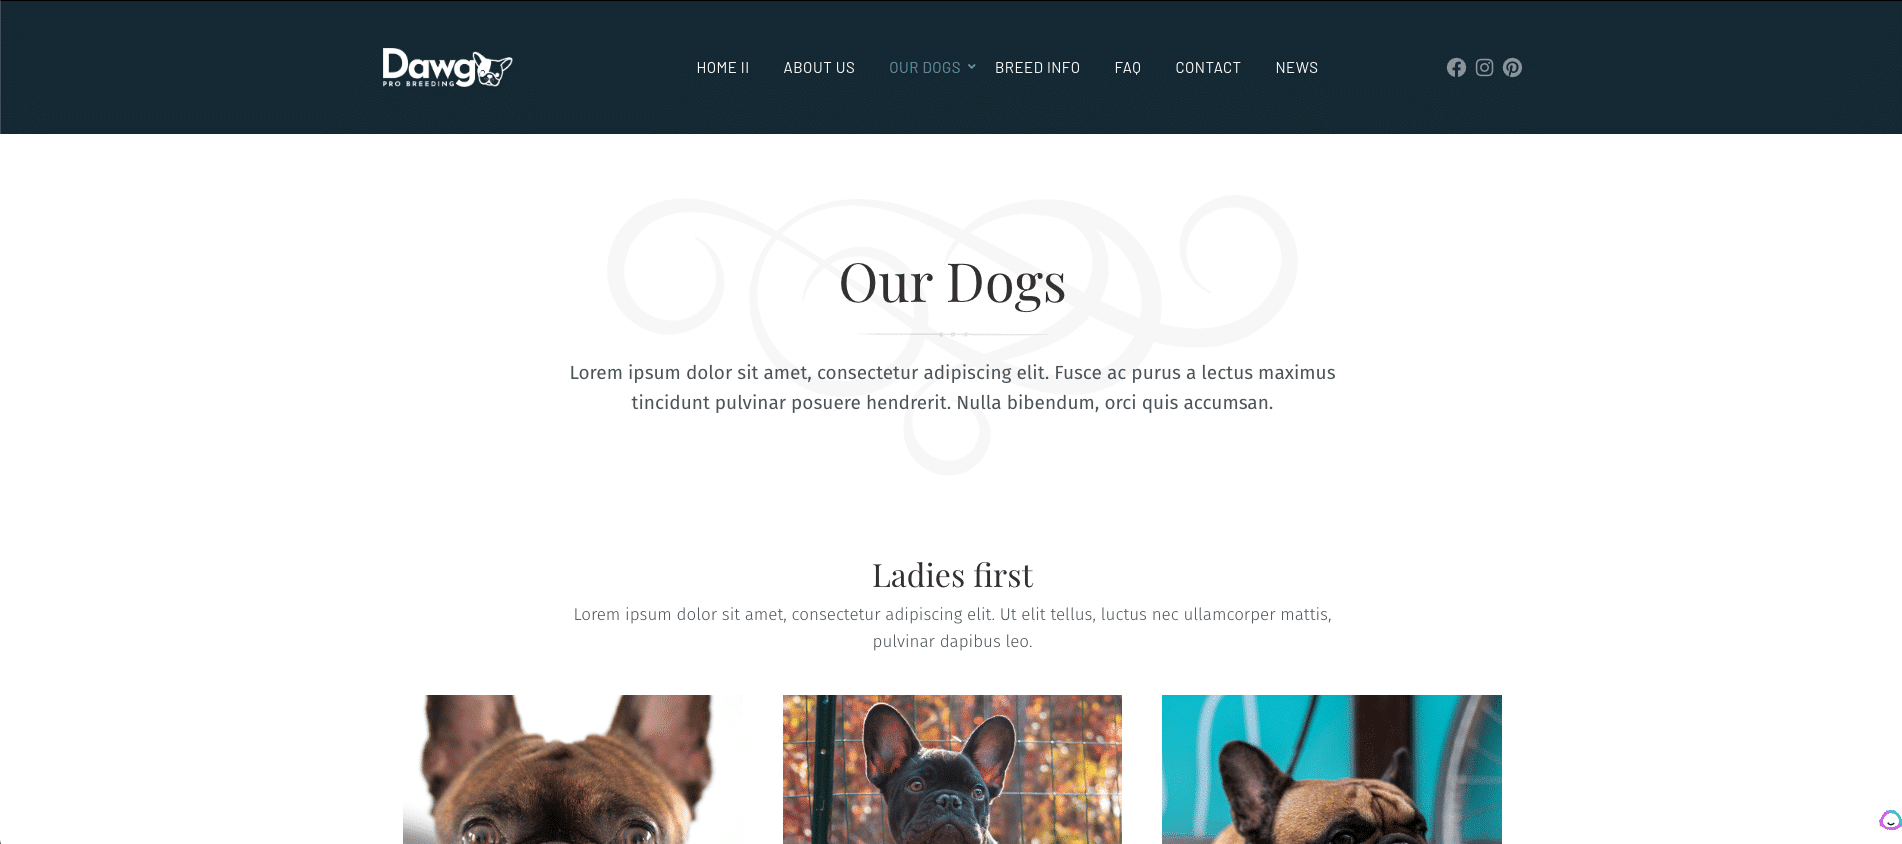 How to Create A Dog Breeding Website (Step-By-Step Guide) 11